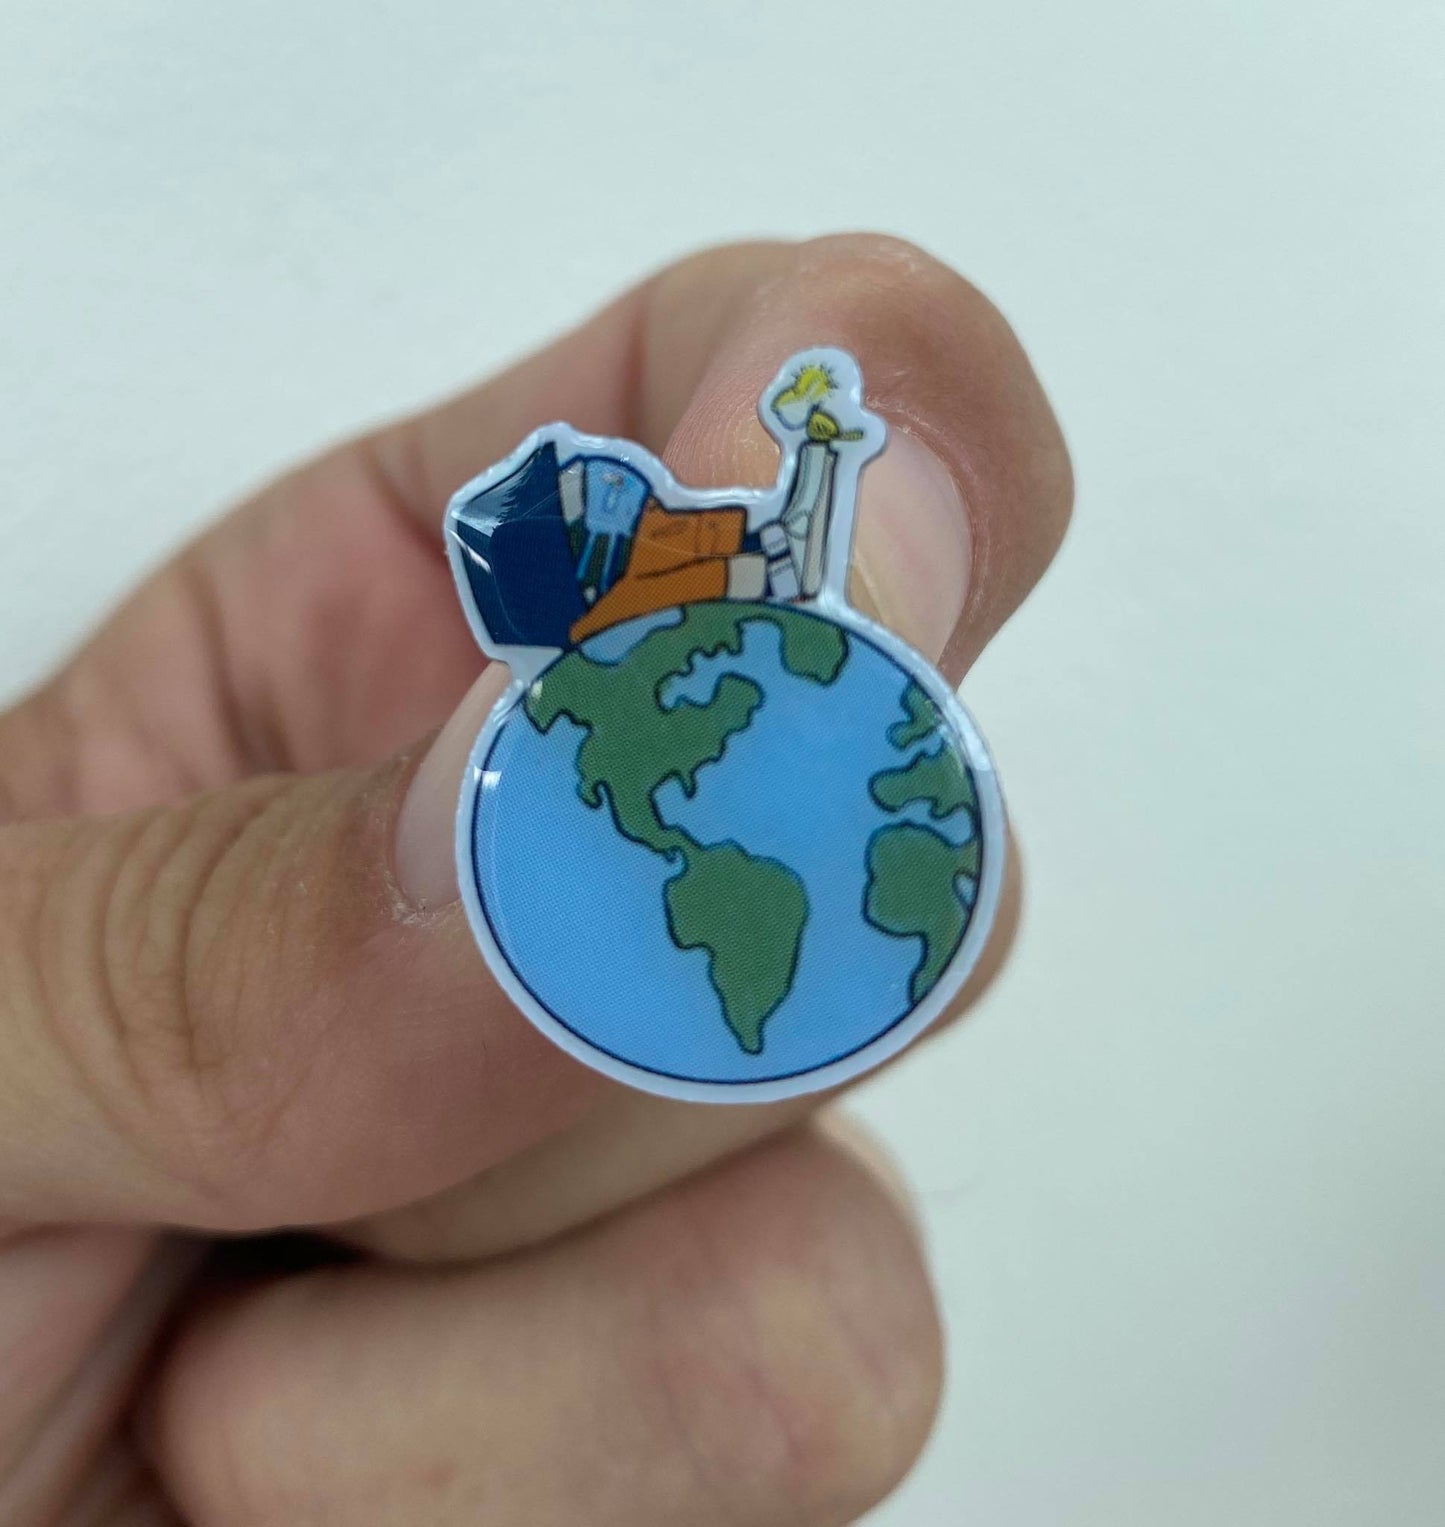 Fishermans friend on top of the world limited edition Pin